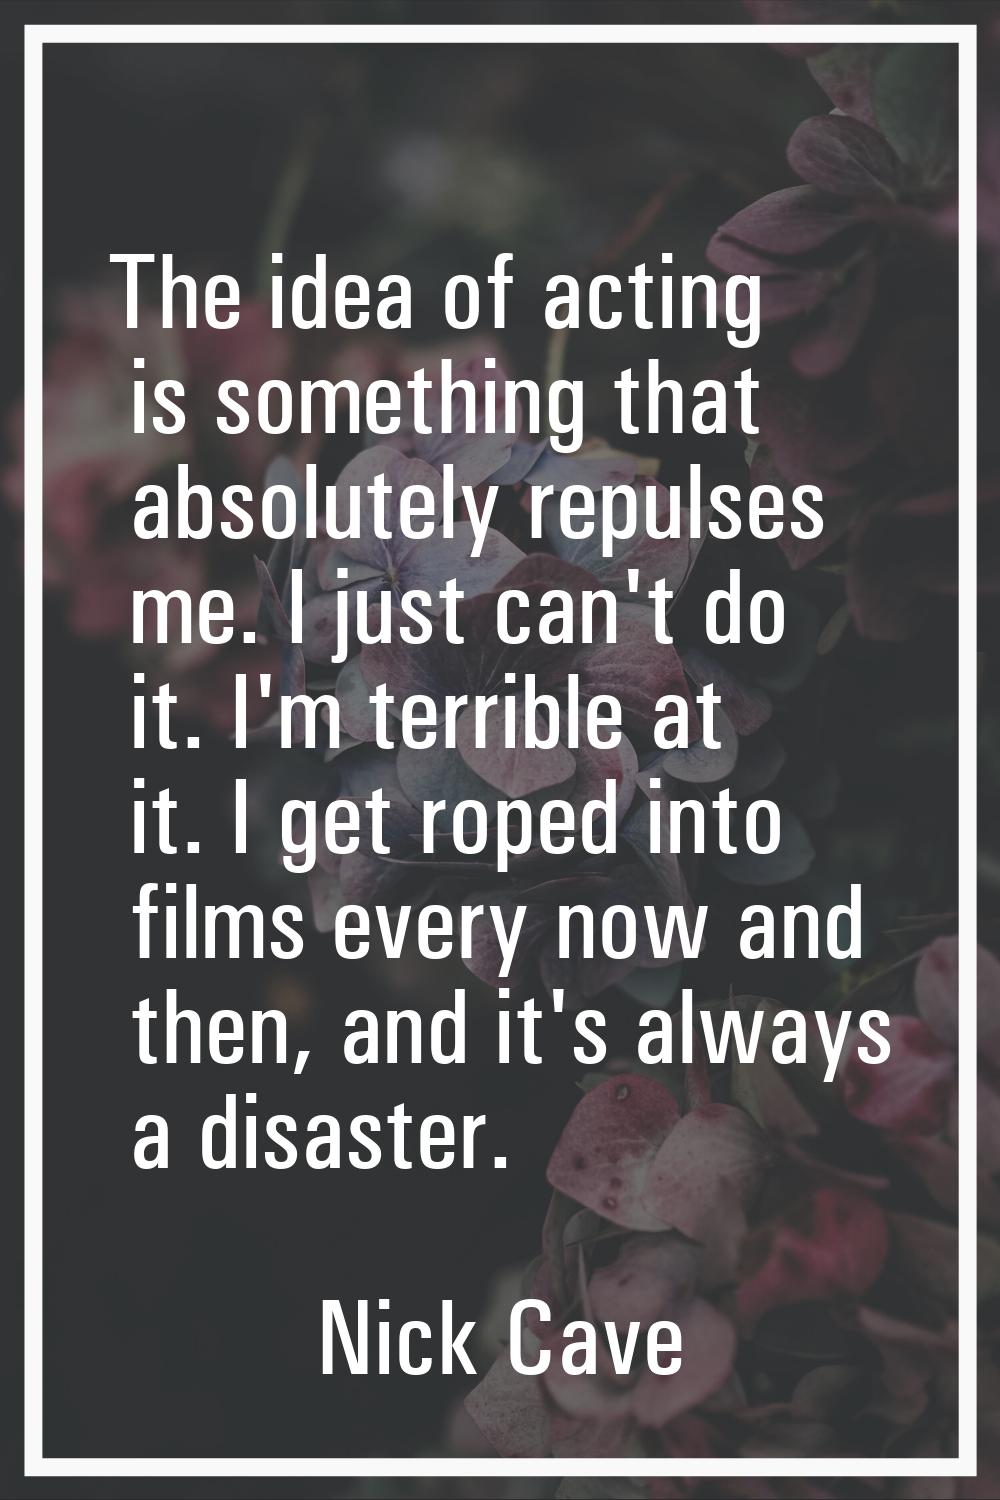 The idea of acting is something that absolutely repulses me. I just can't do it. I'm terrible at it